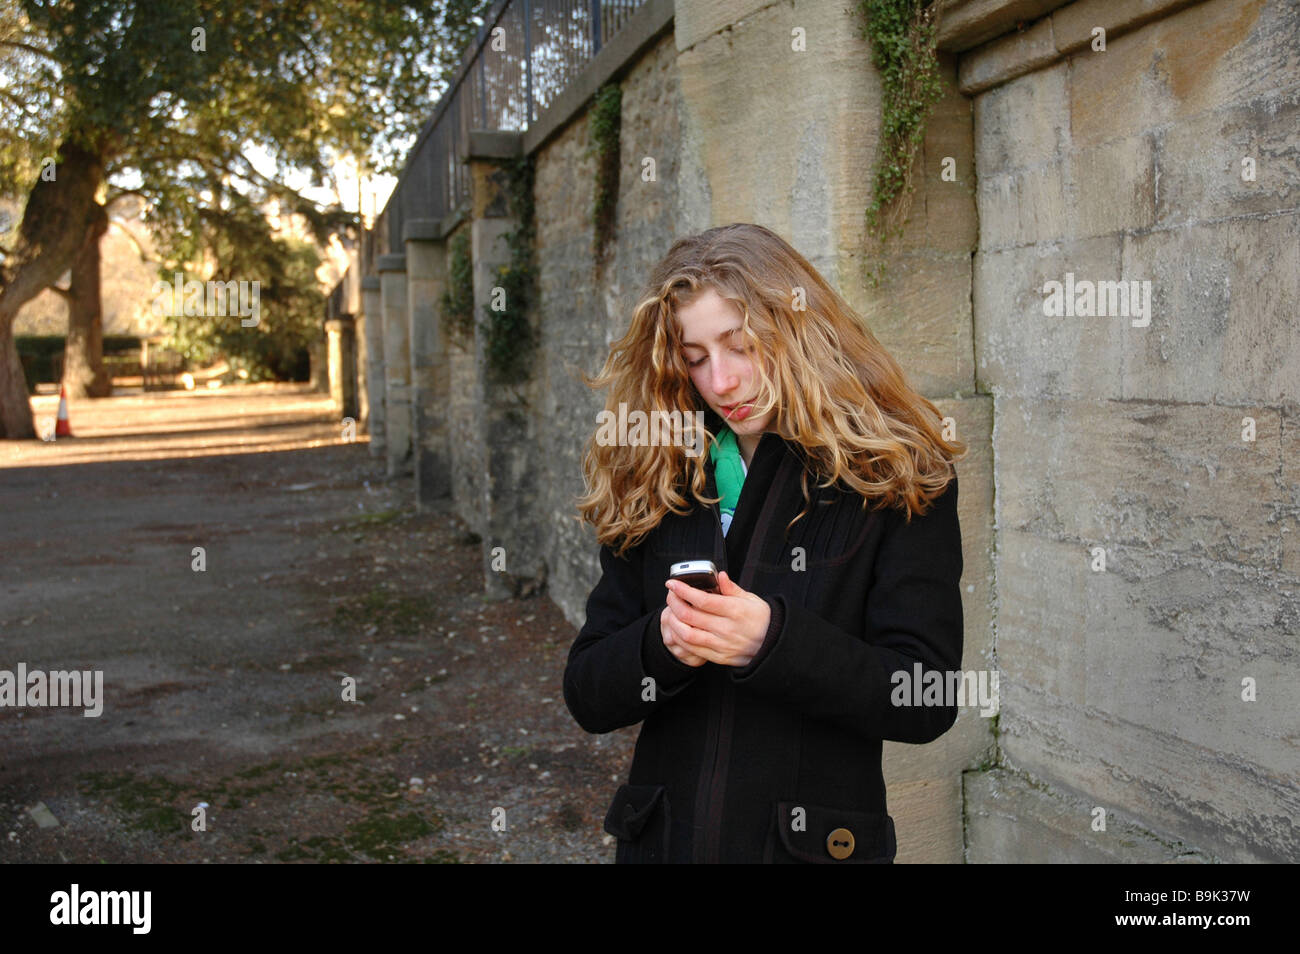 outdoor portrait of pretty teenager Stock Photo